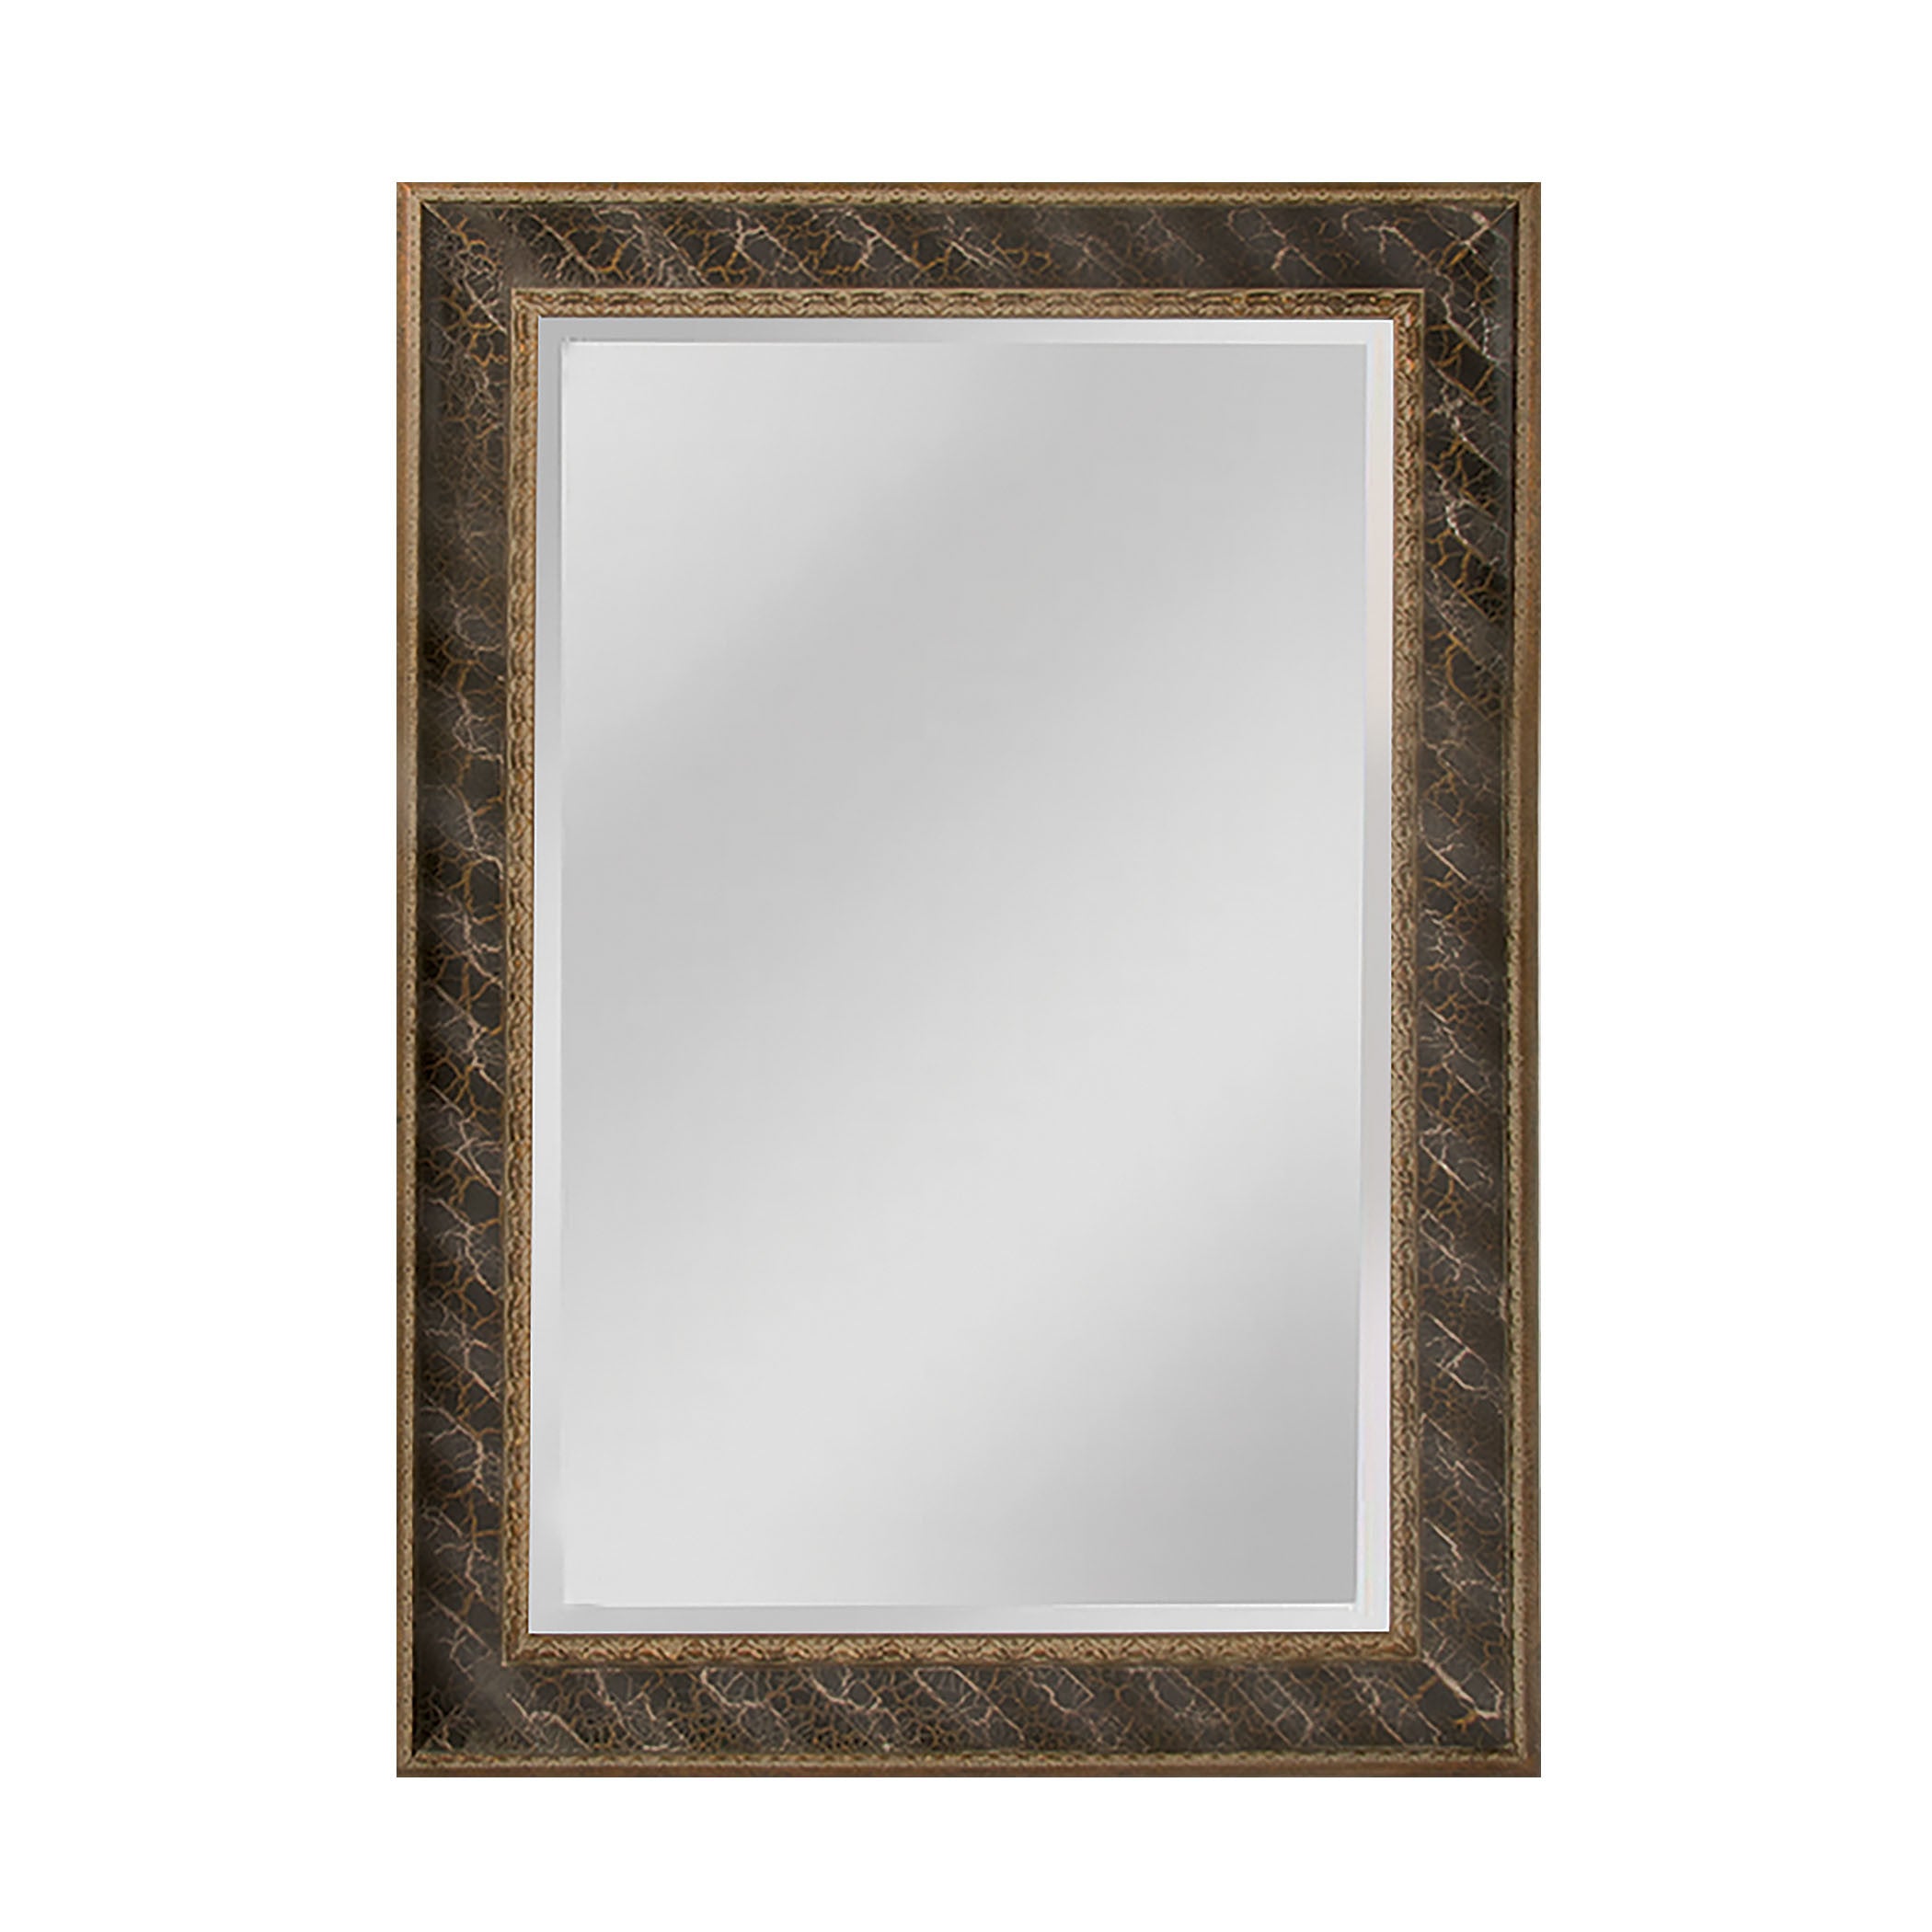 Mirror Masters Mw4024c-0052 Clearfield Collection Light Antique Silver,gold,black Finish Wall Mirror